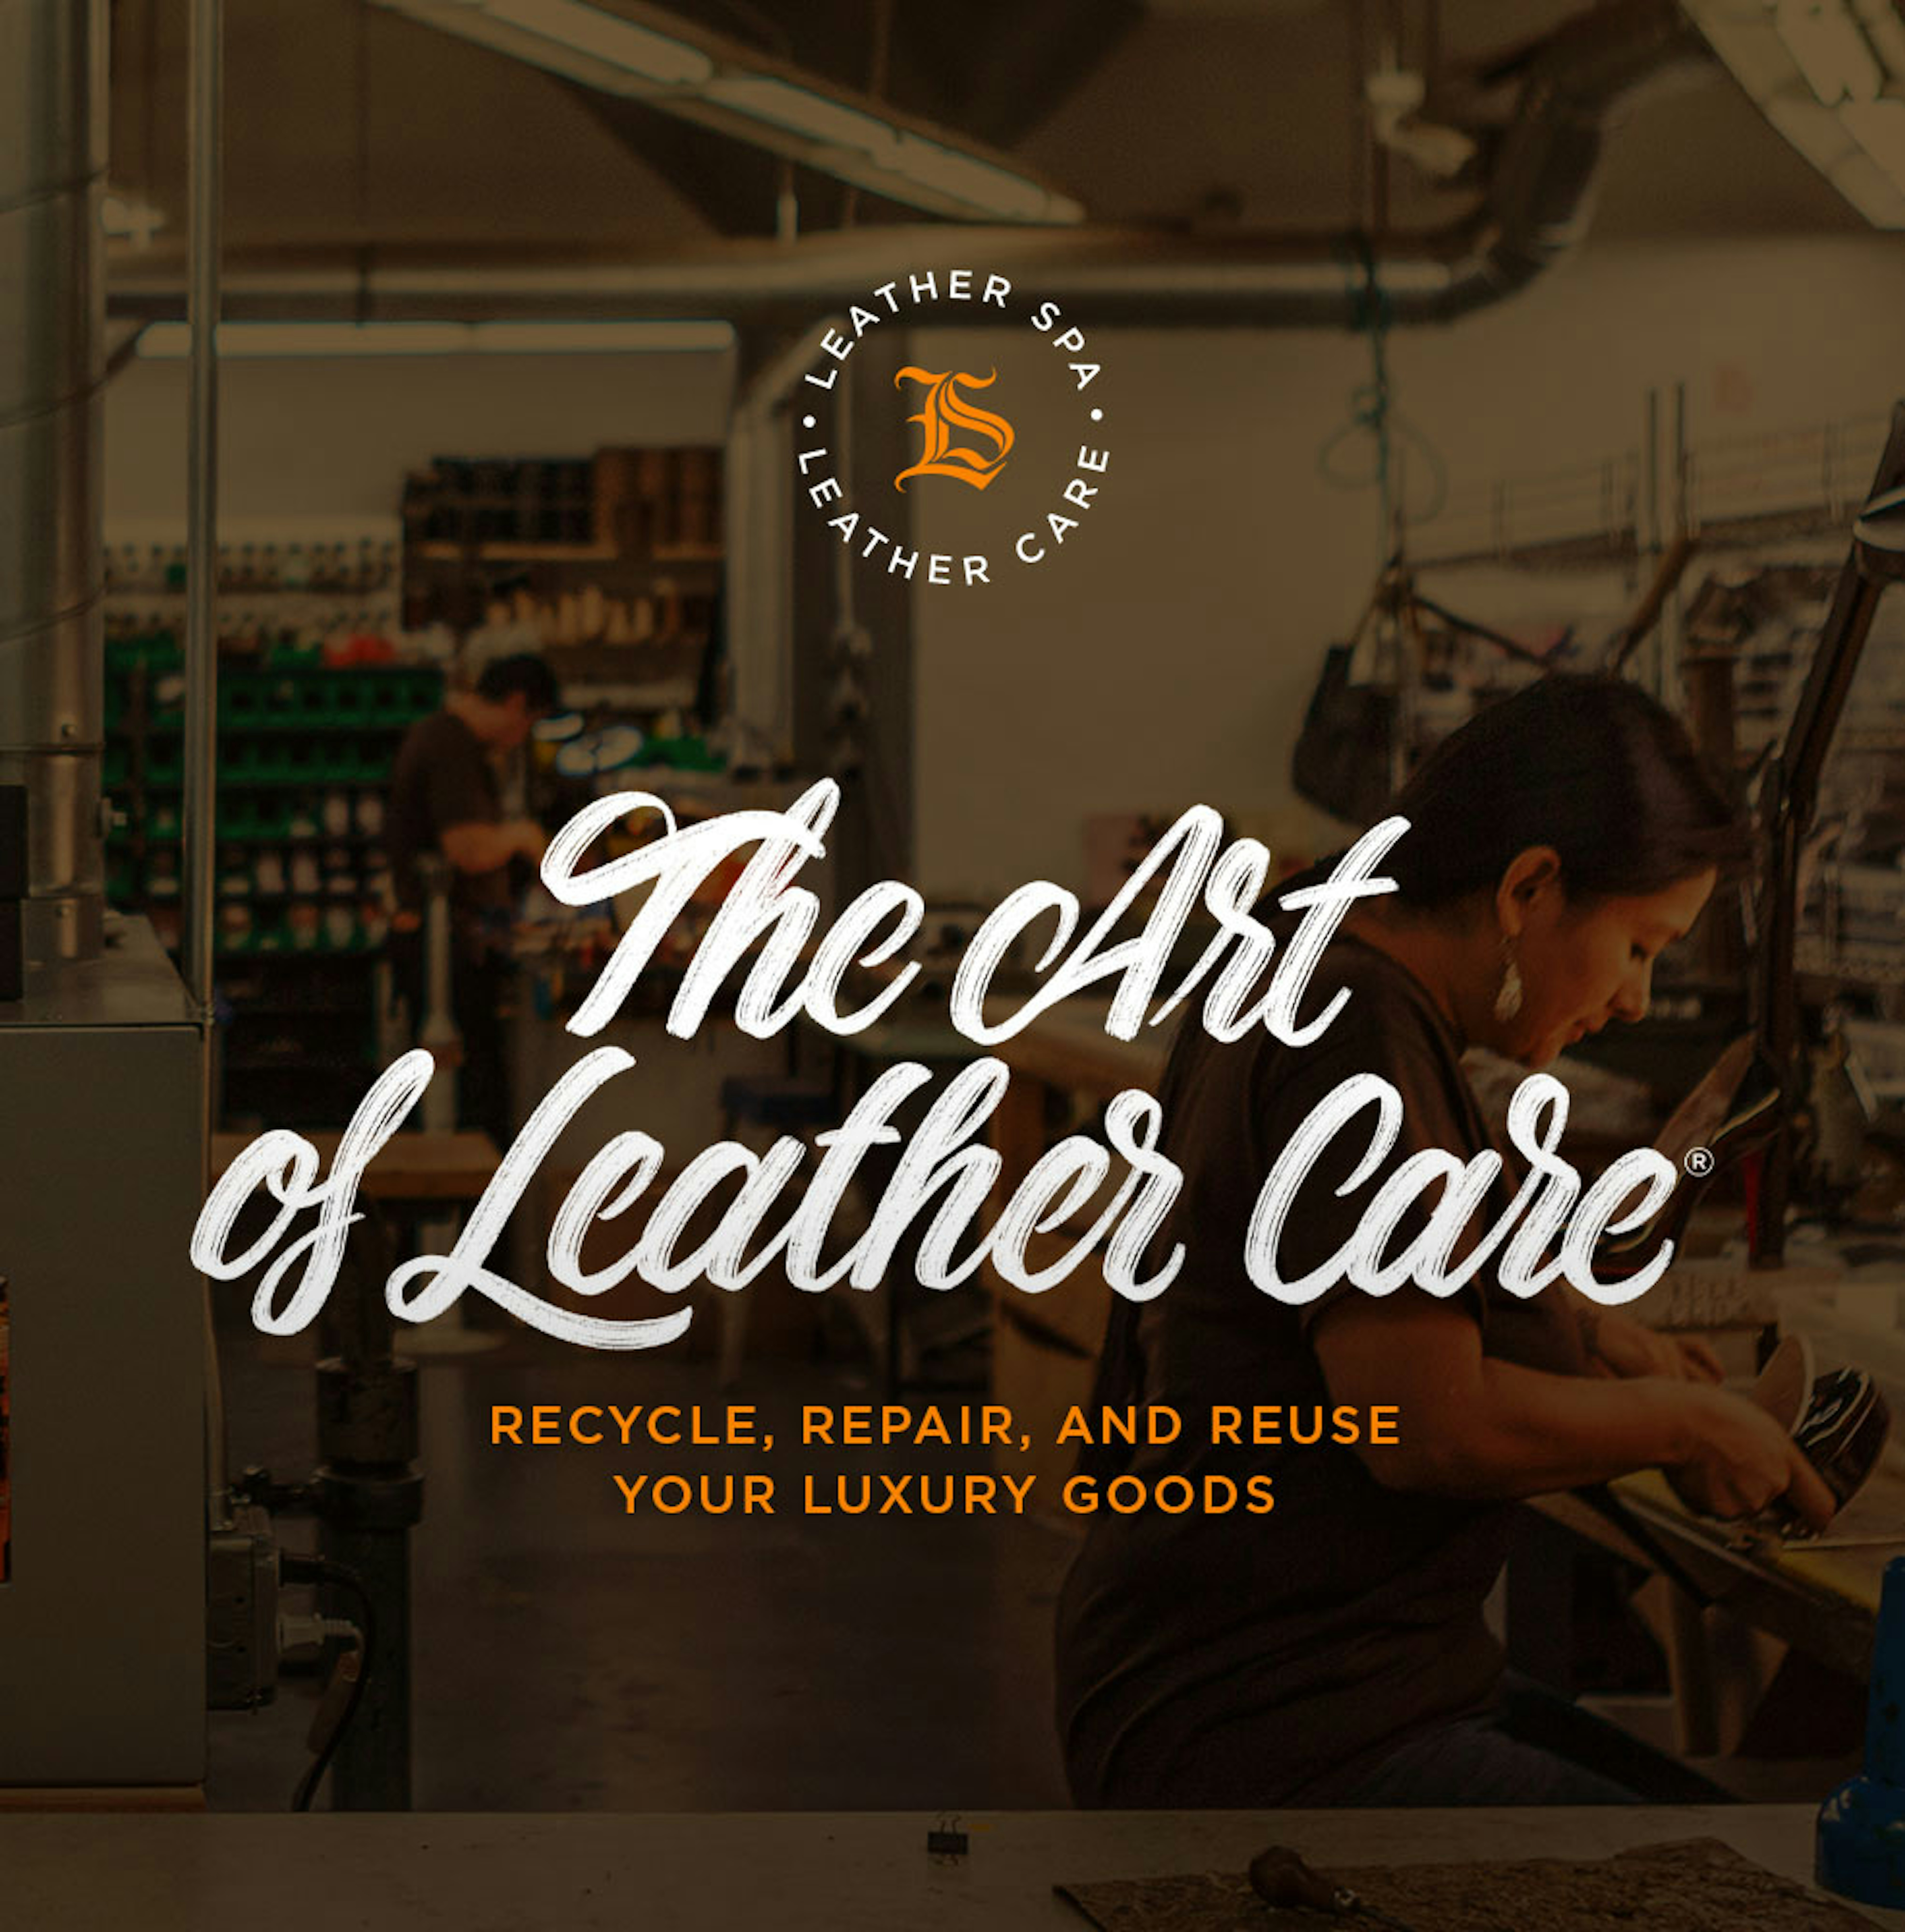 LEATHER SPA - The Art of Leather Care